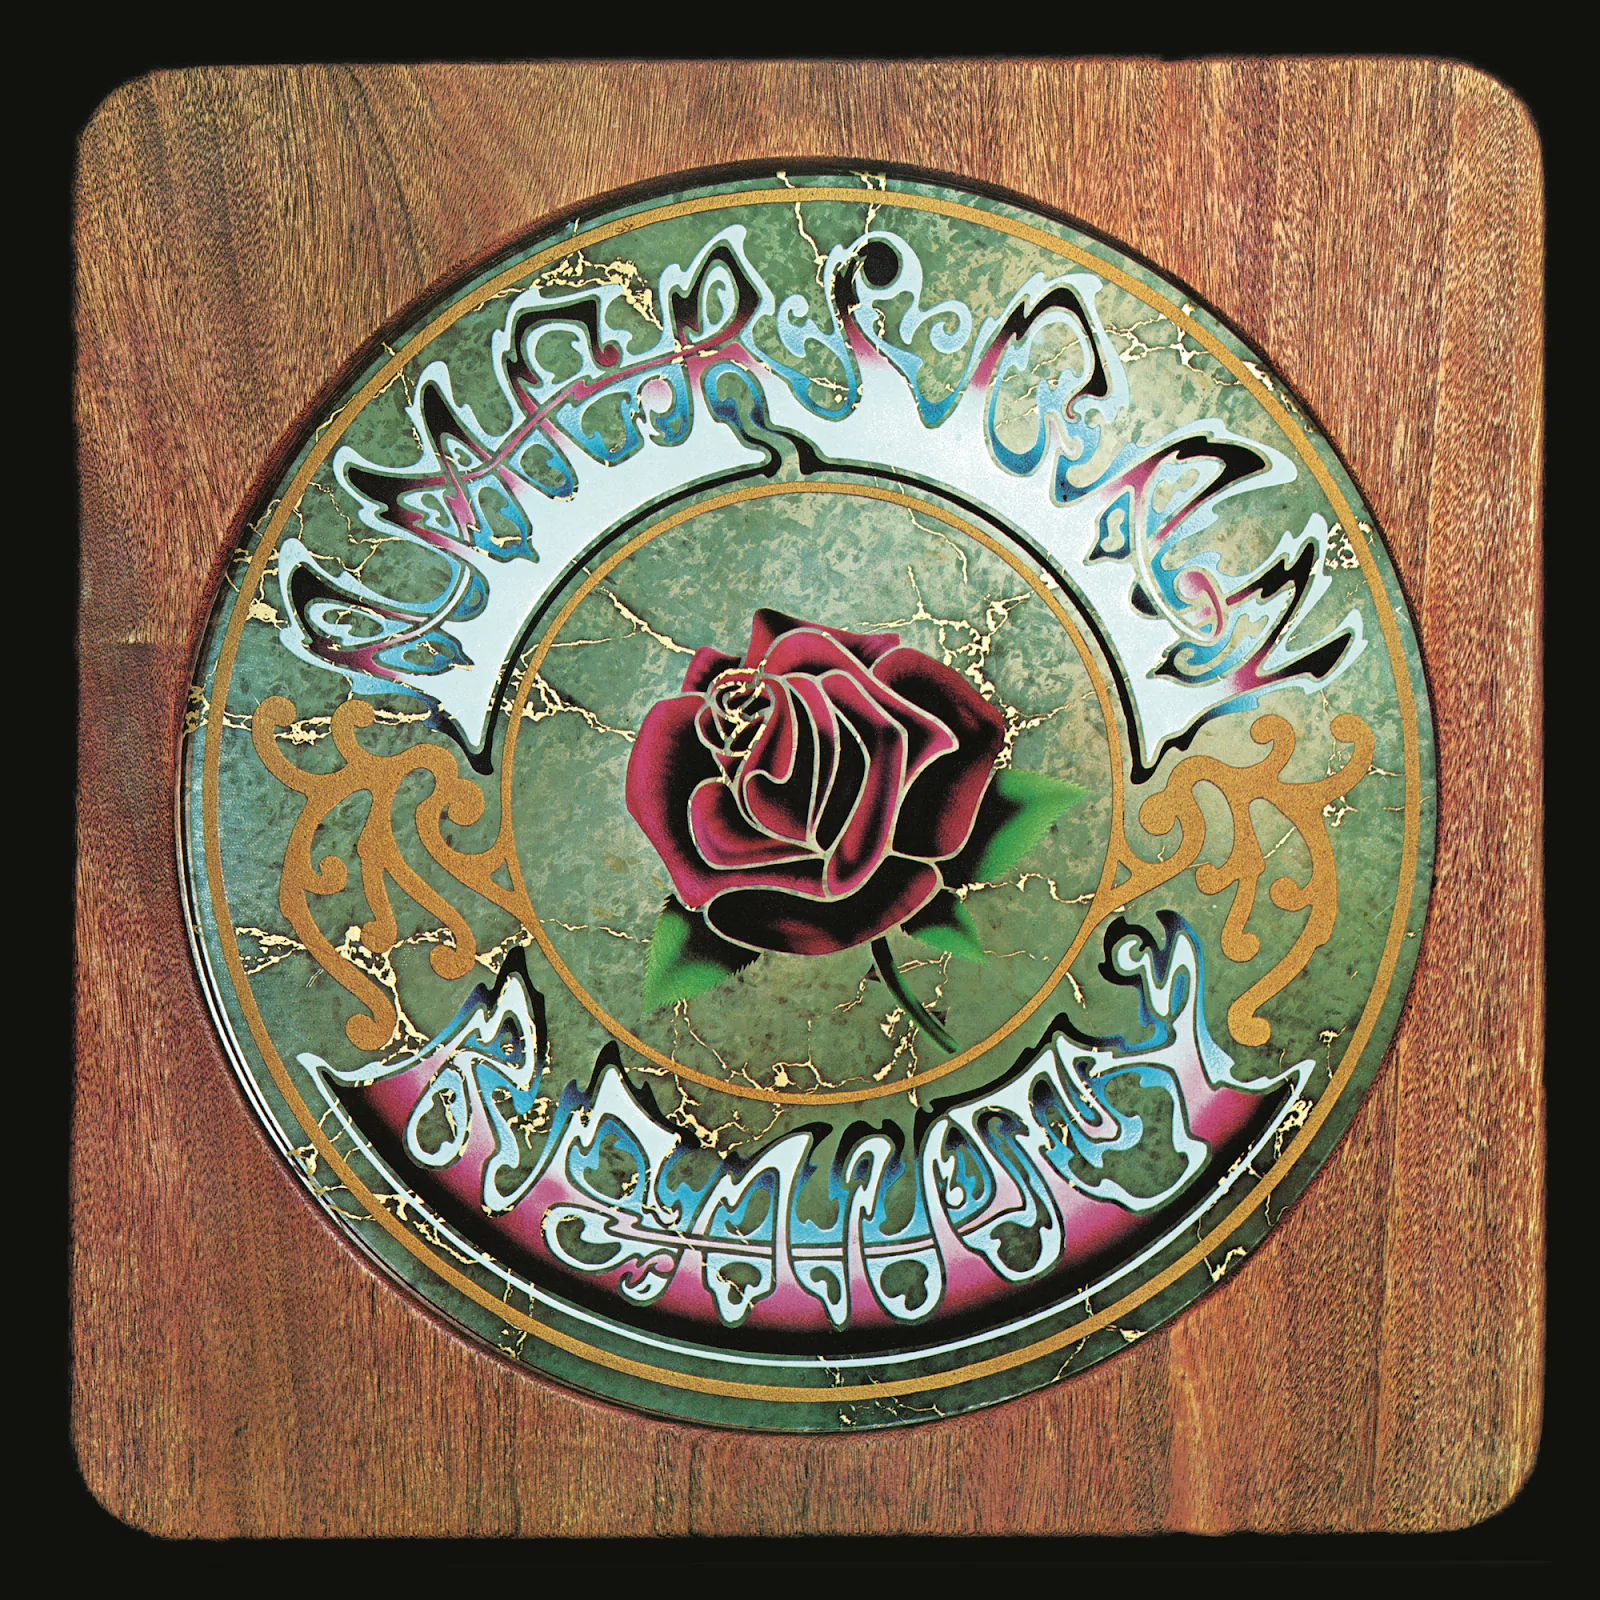 GRATEFUL DEAD release American Beauty: 50th anniversary deluxe edition 